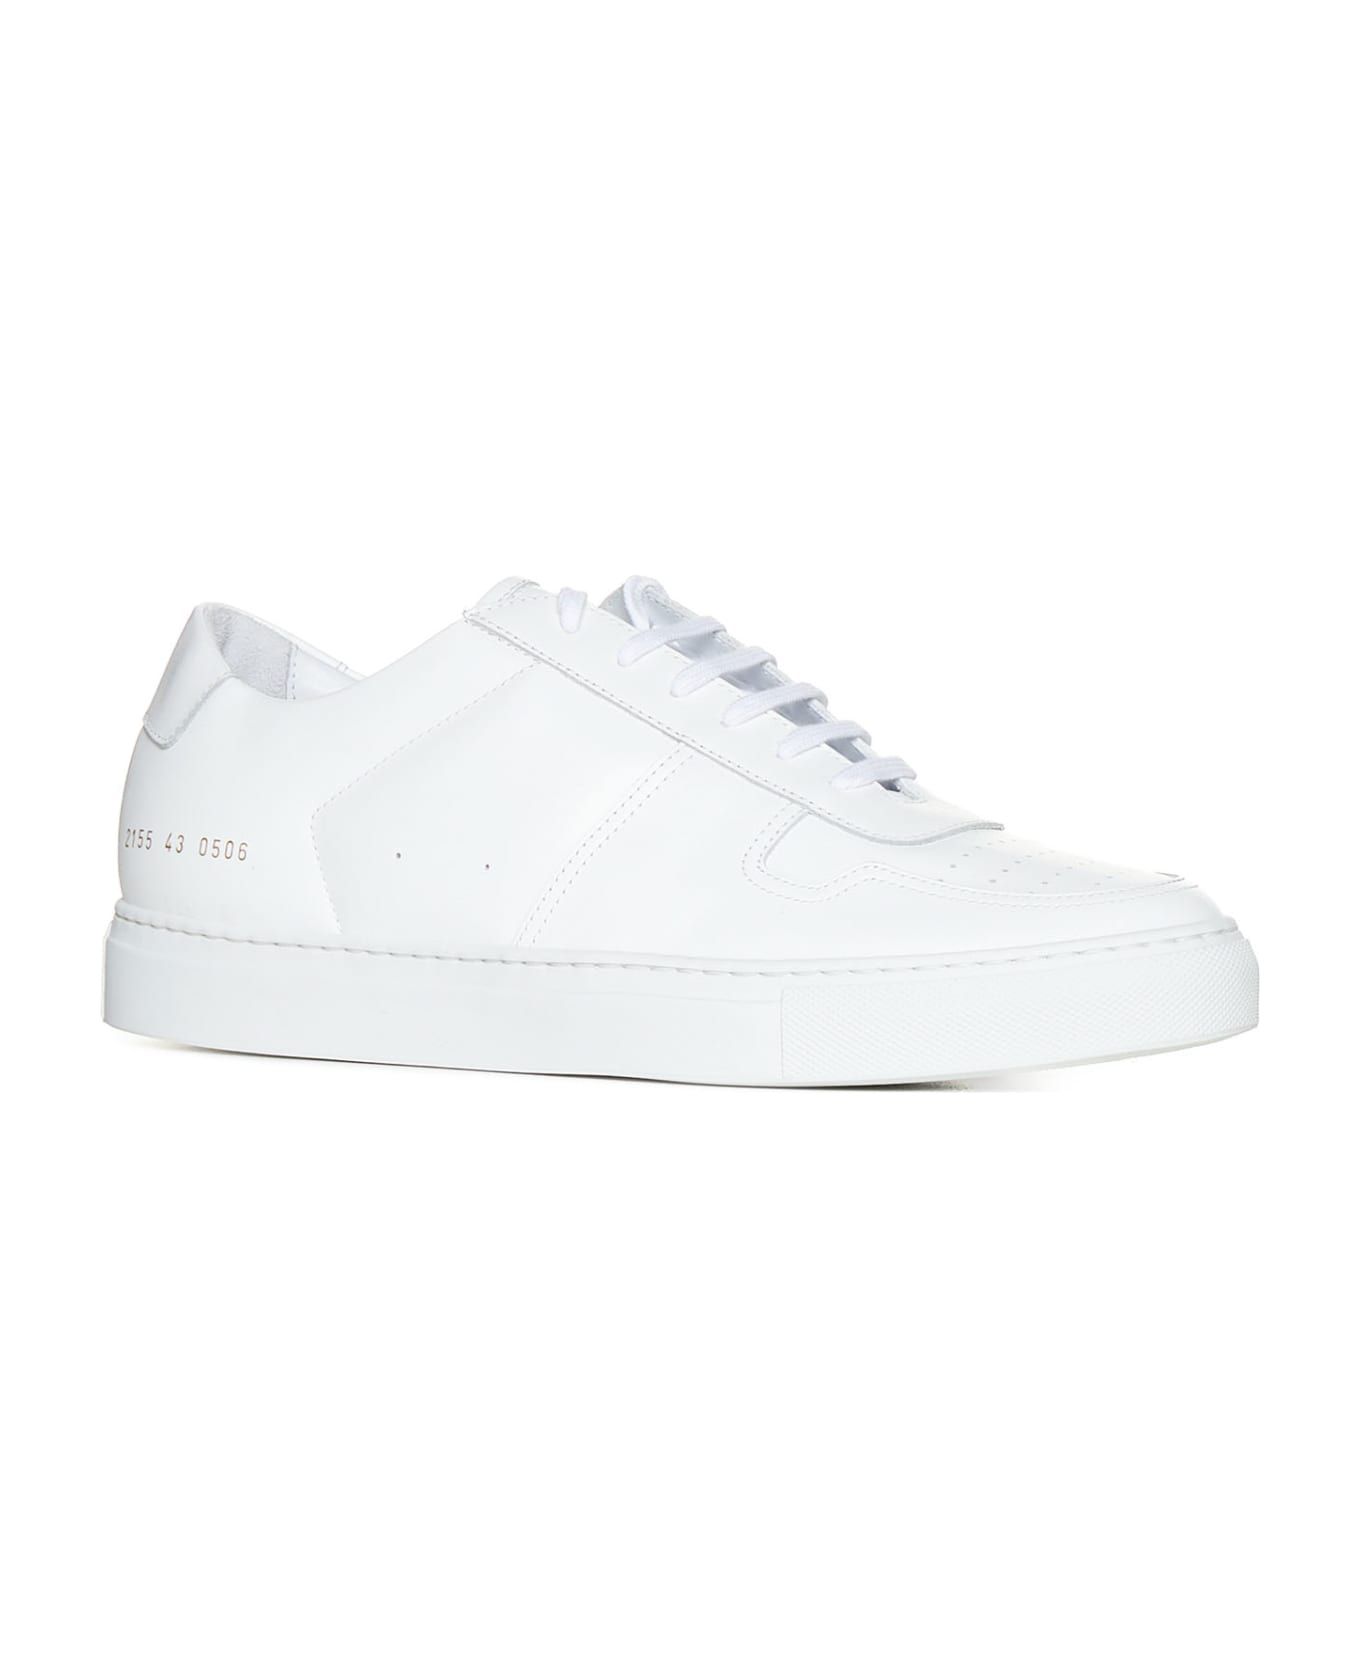 Common Projects Bball Low Sneakers - White スニーカー